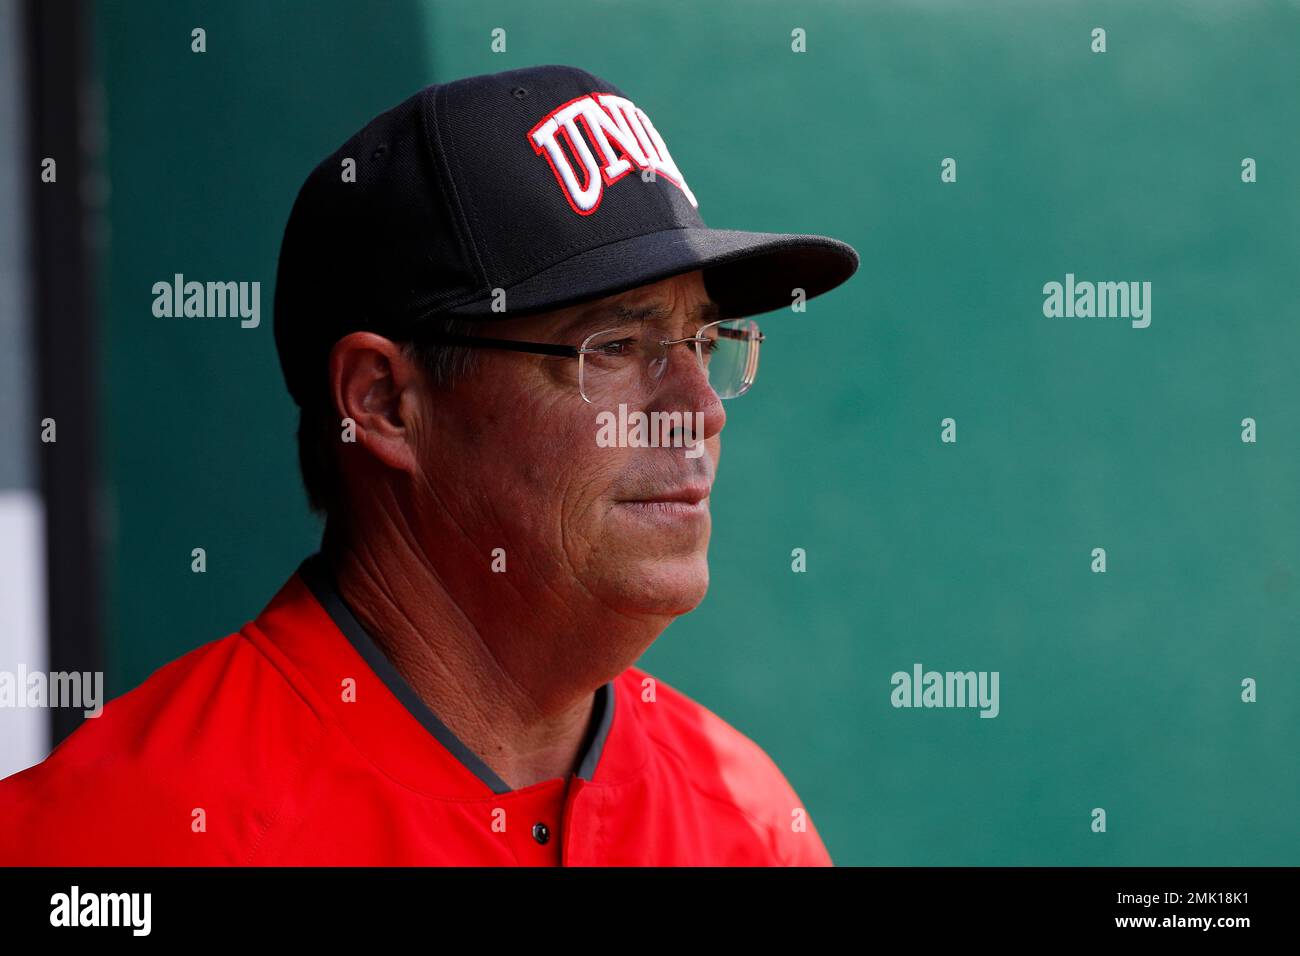 UNLV's volunteer and pitching coach Greg Maddux looks on prior to